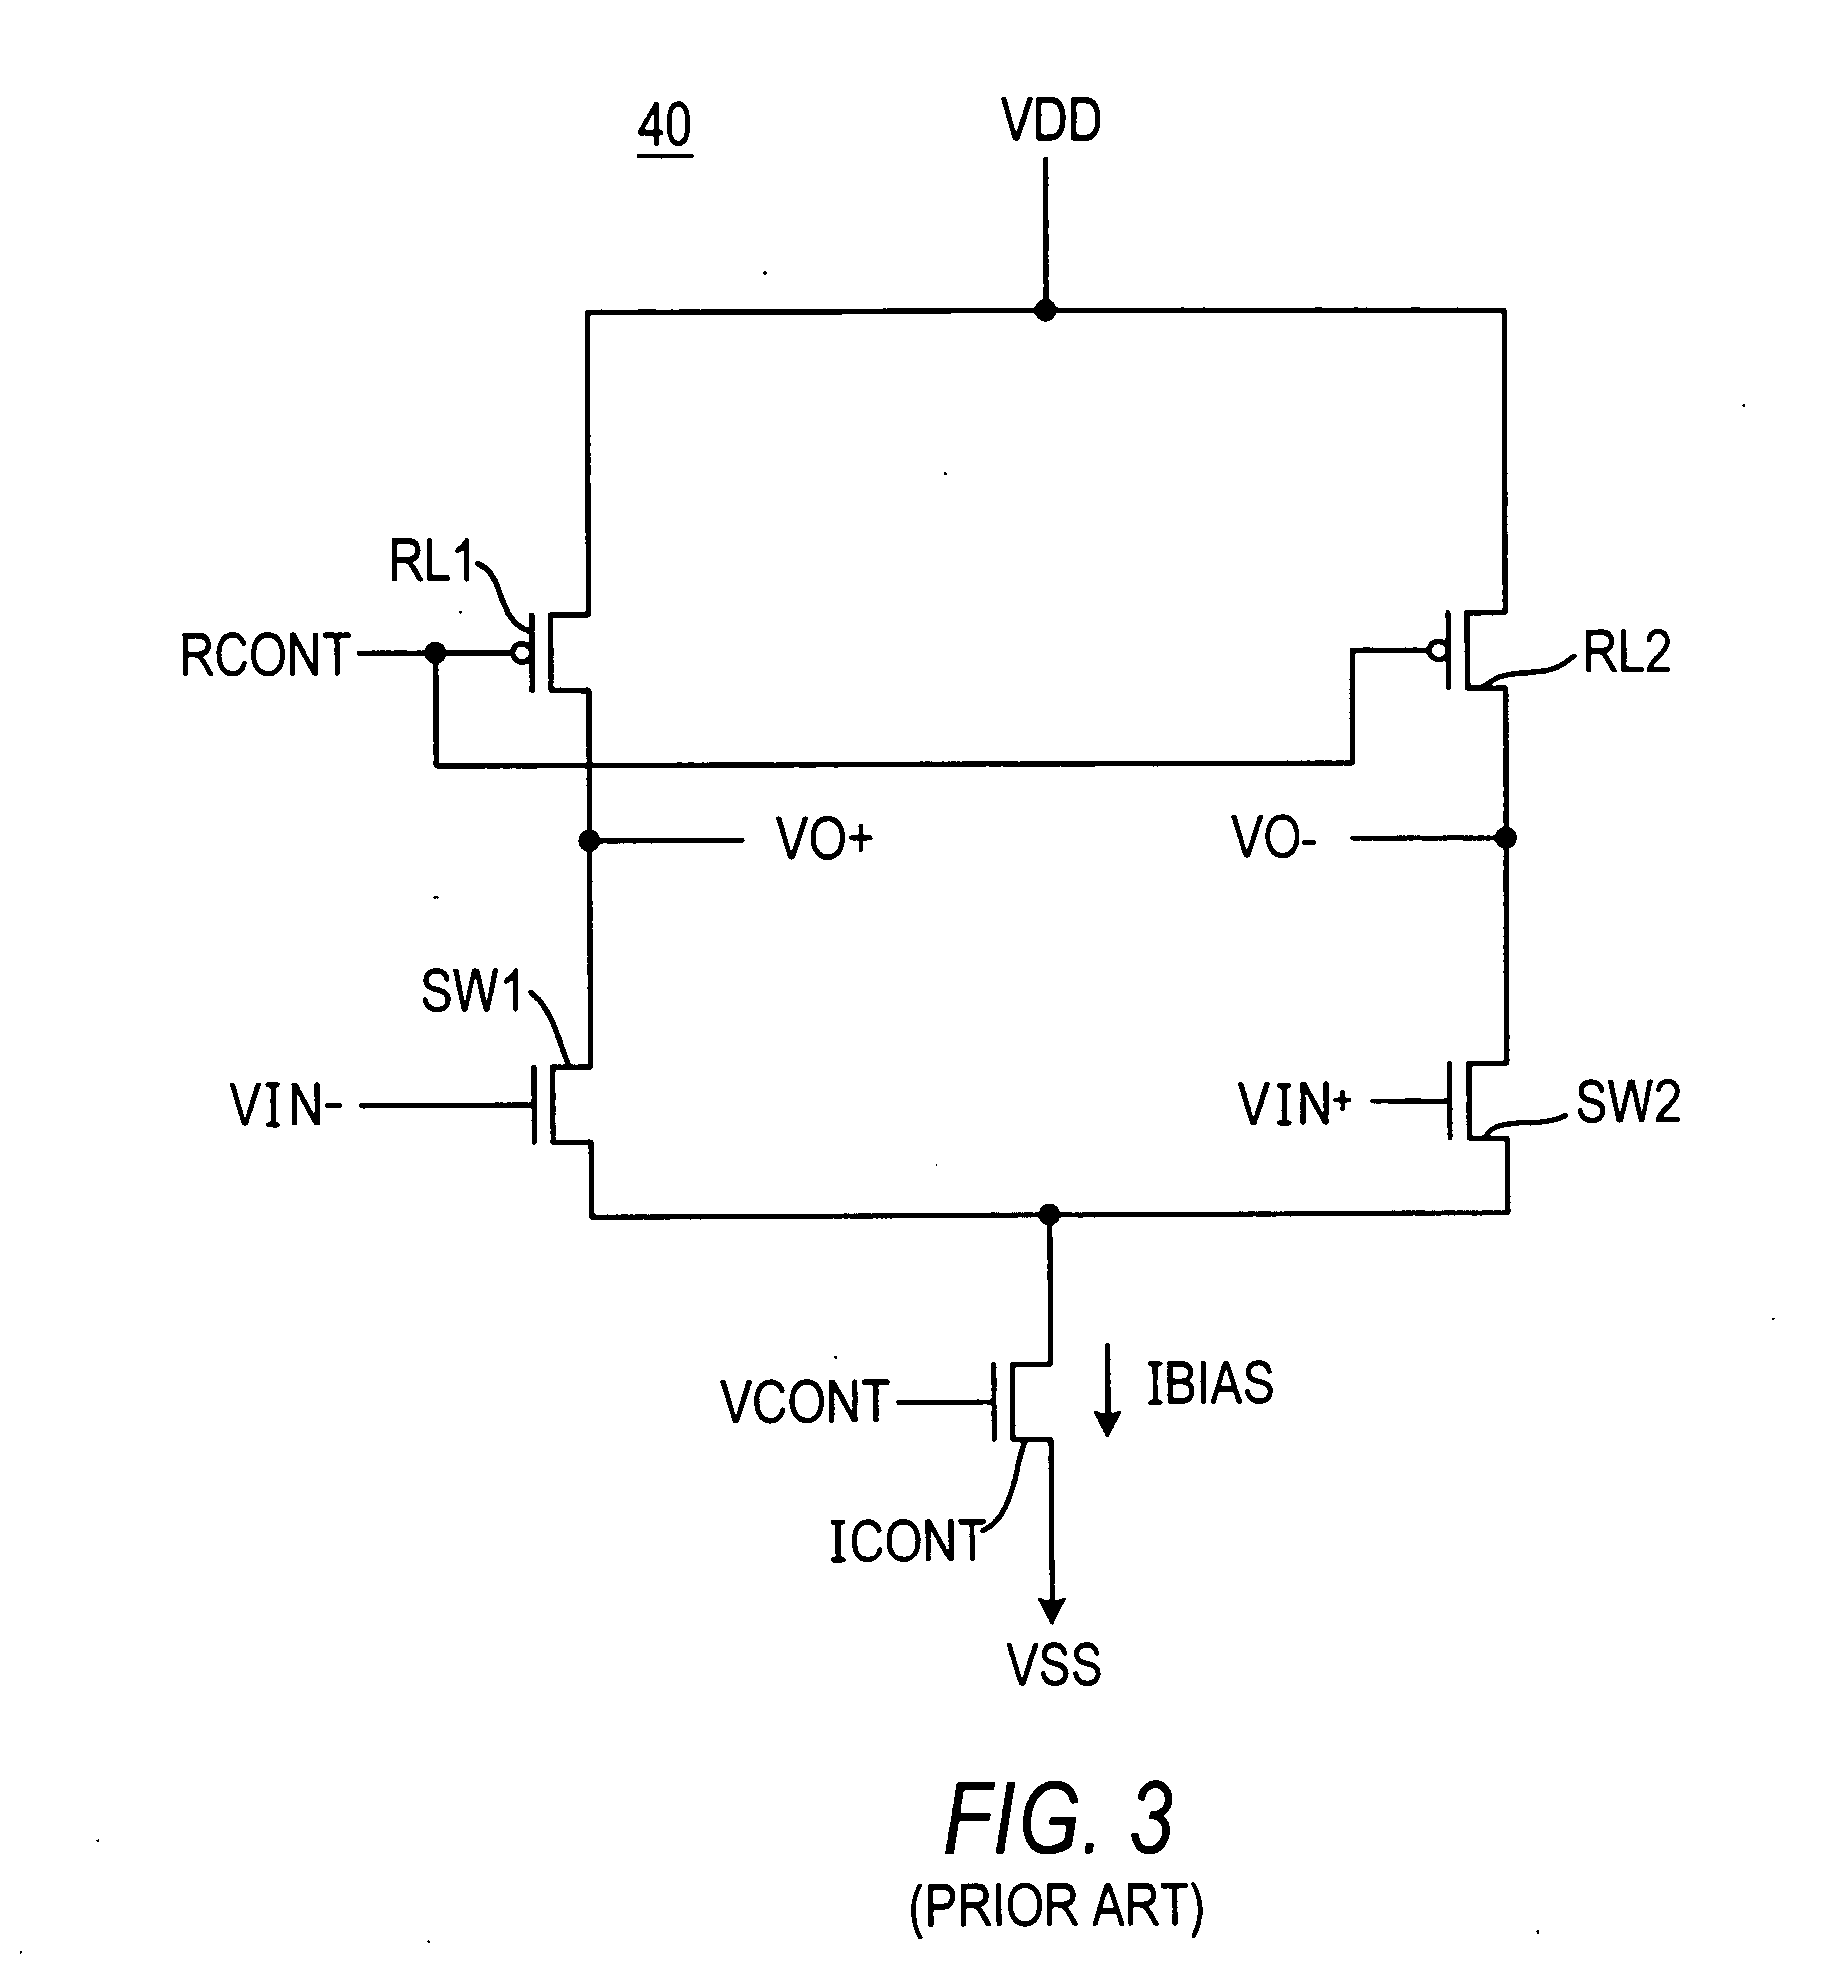 Voltage controlled oscillator programmable delay cells